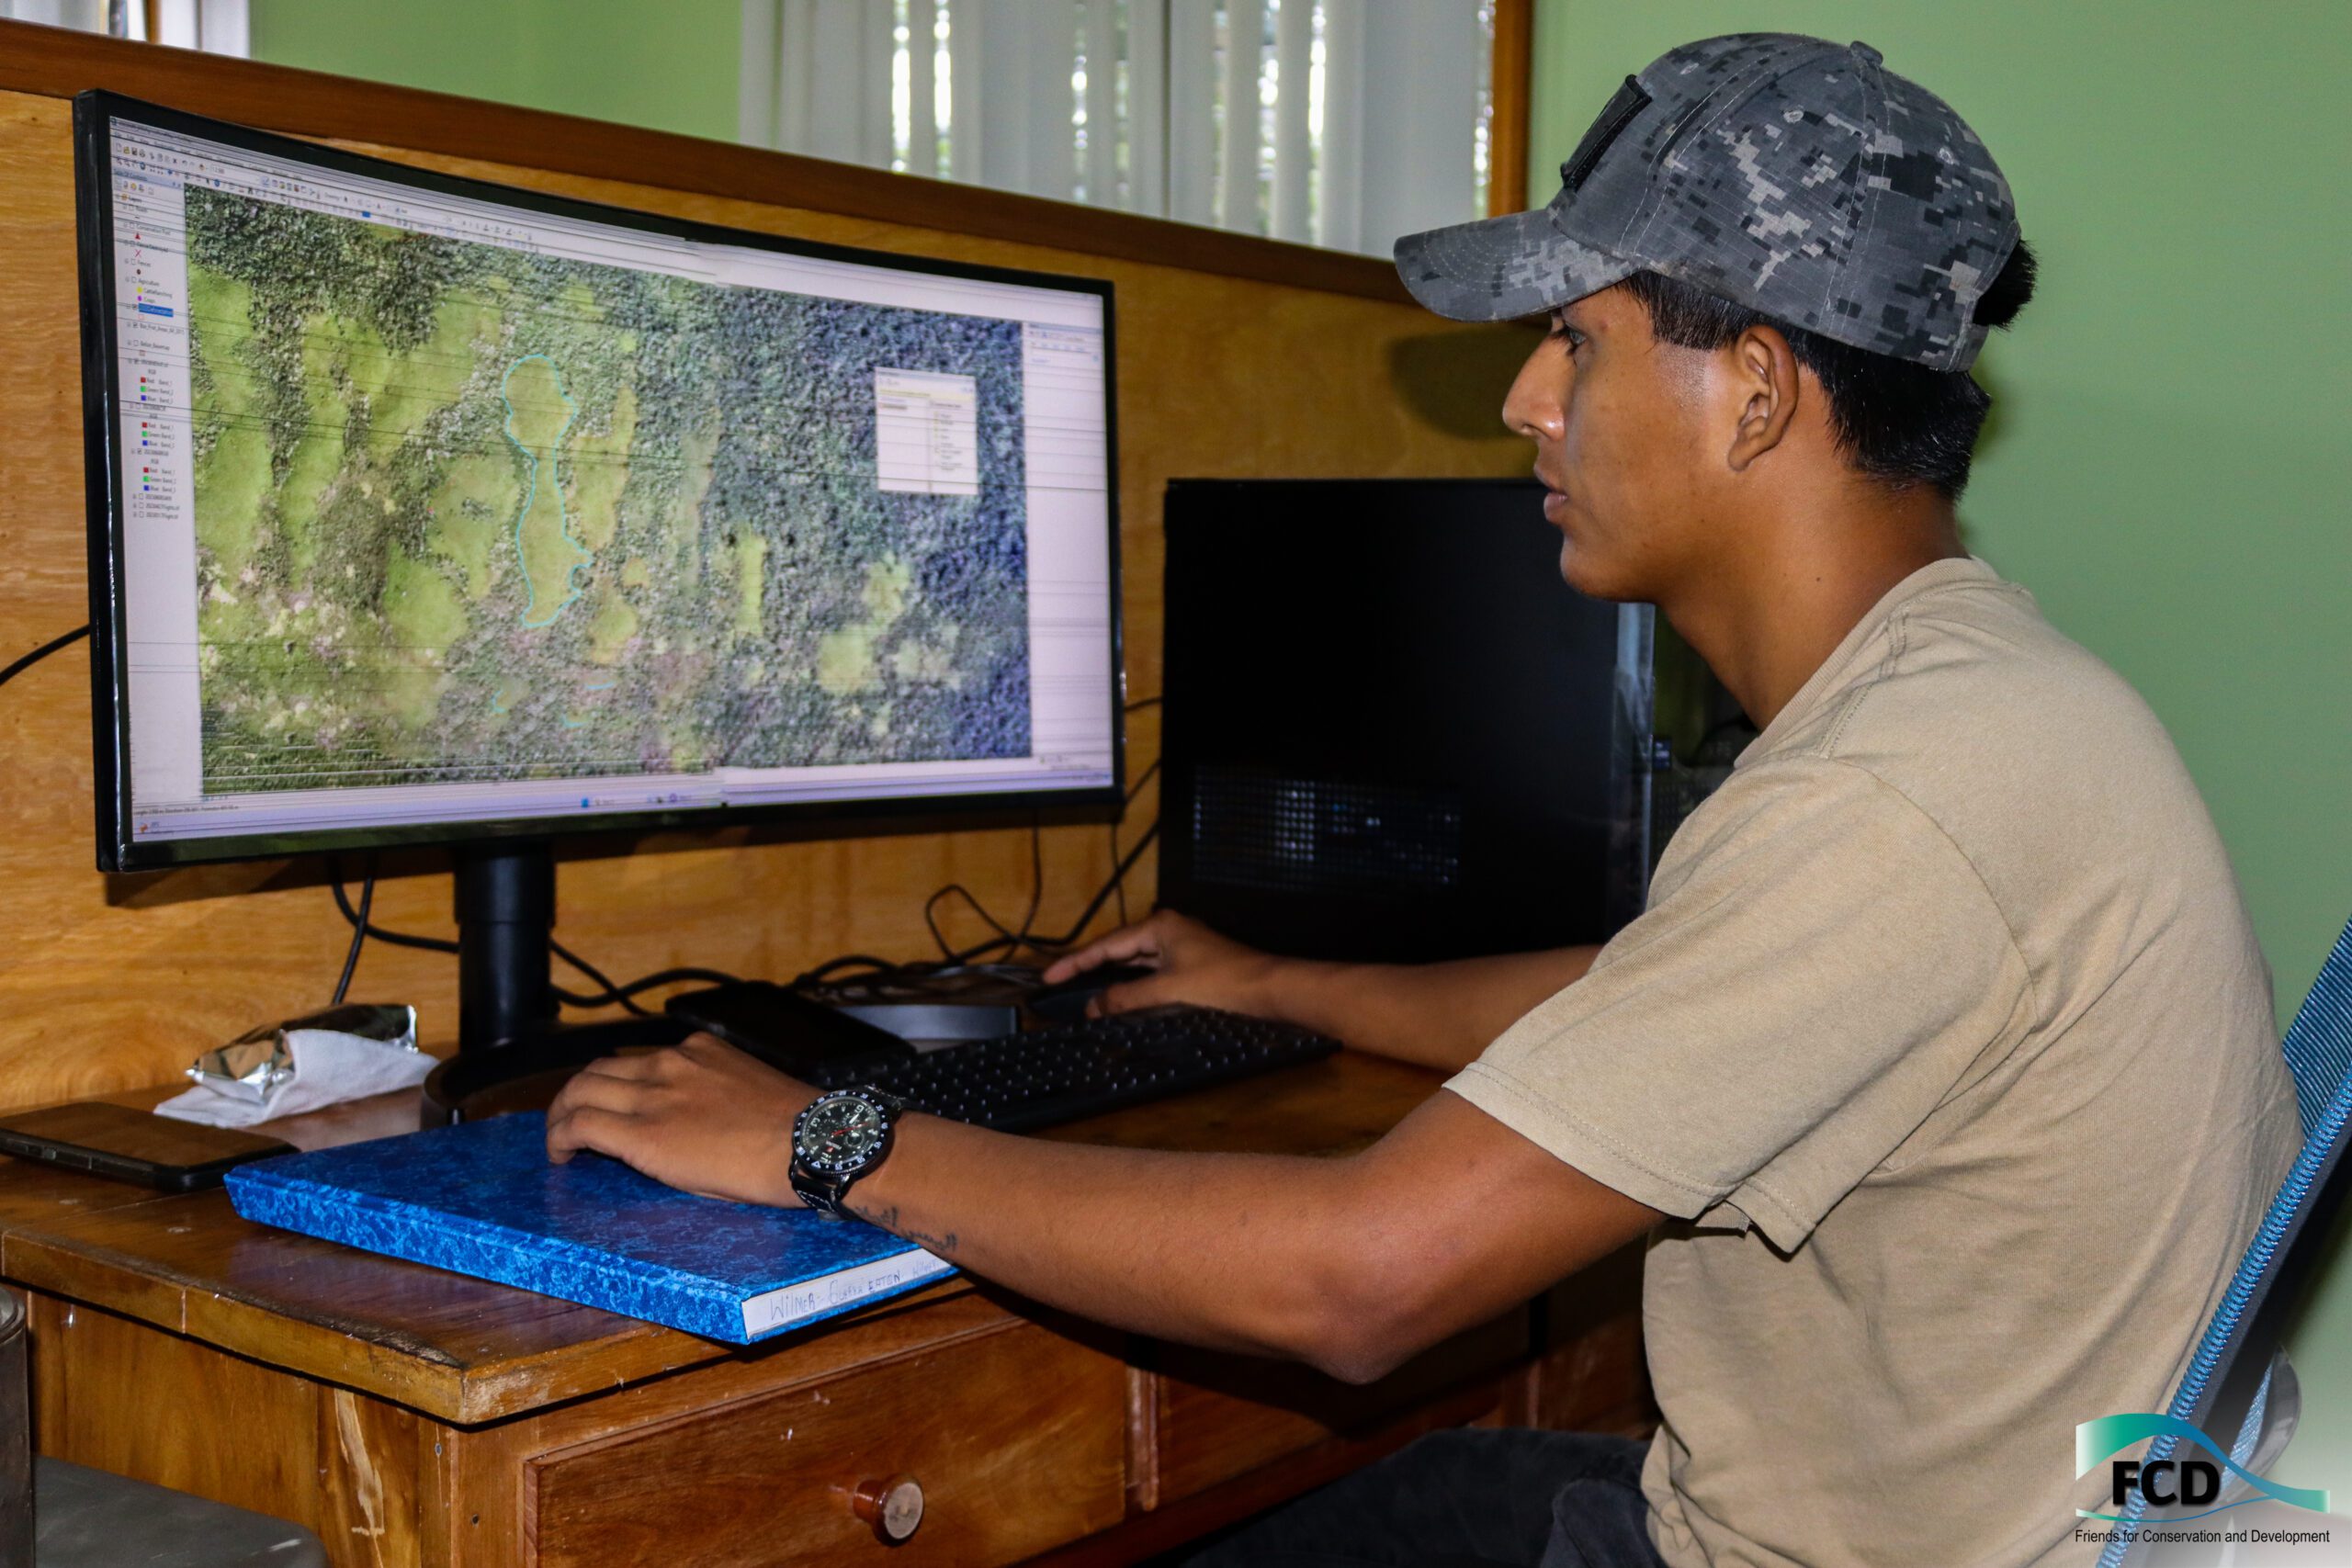 FCD’s Data Analyst plays an important role in collating and analyzing the data recovered from the field.